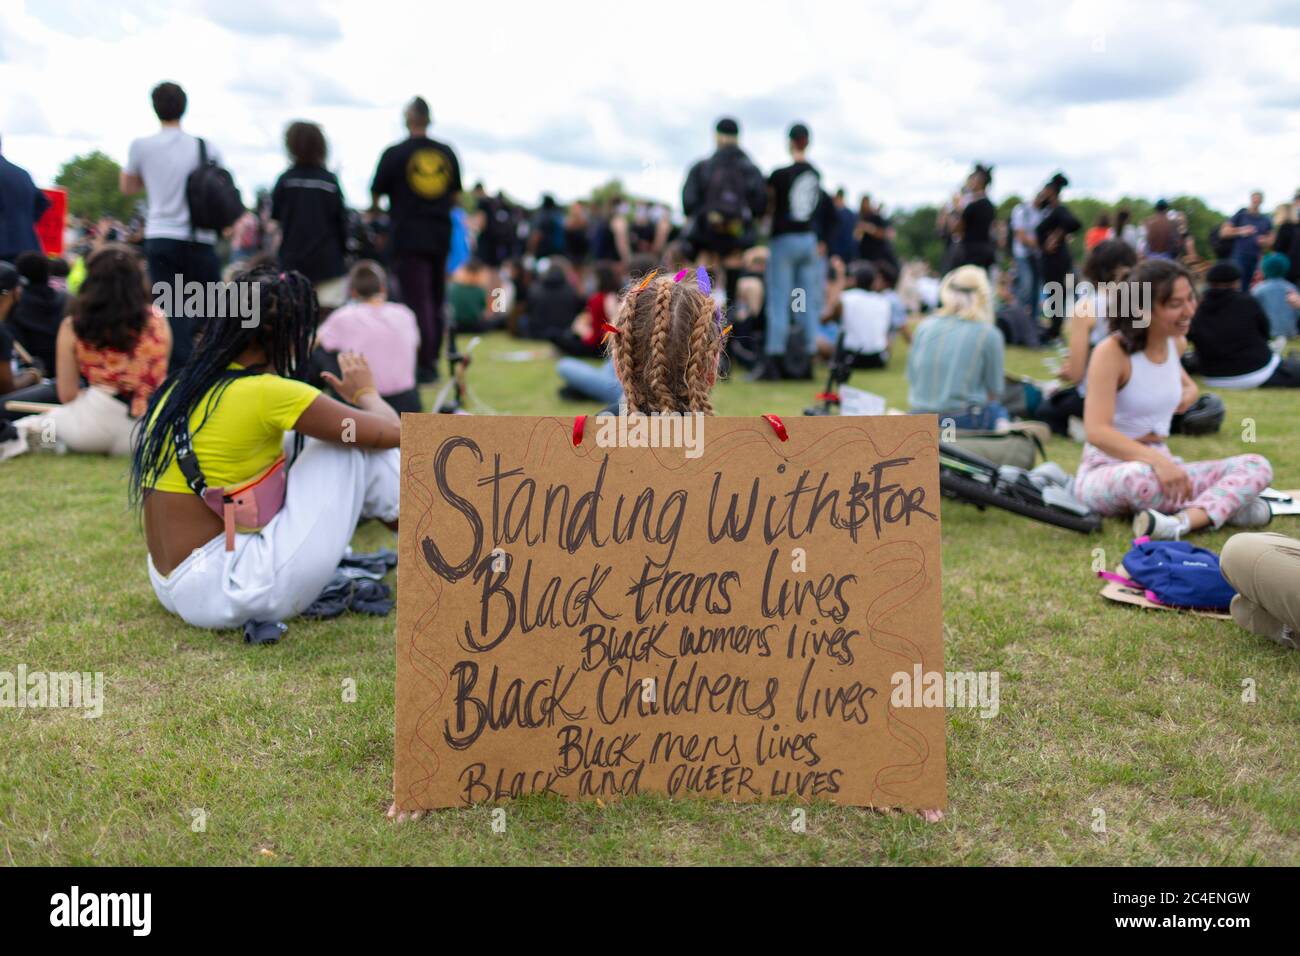 Protesters sit on the grass during a Black Lives Matter demonstration, Hyde Park, London, 20 June 2020 Stock Photo